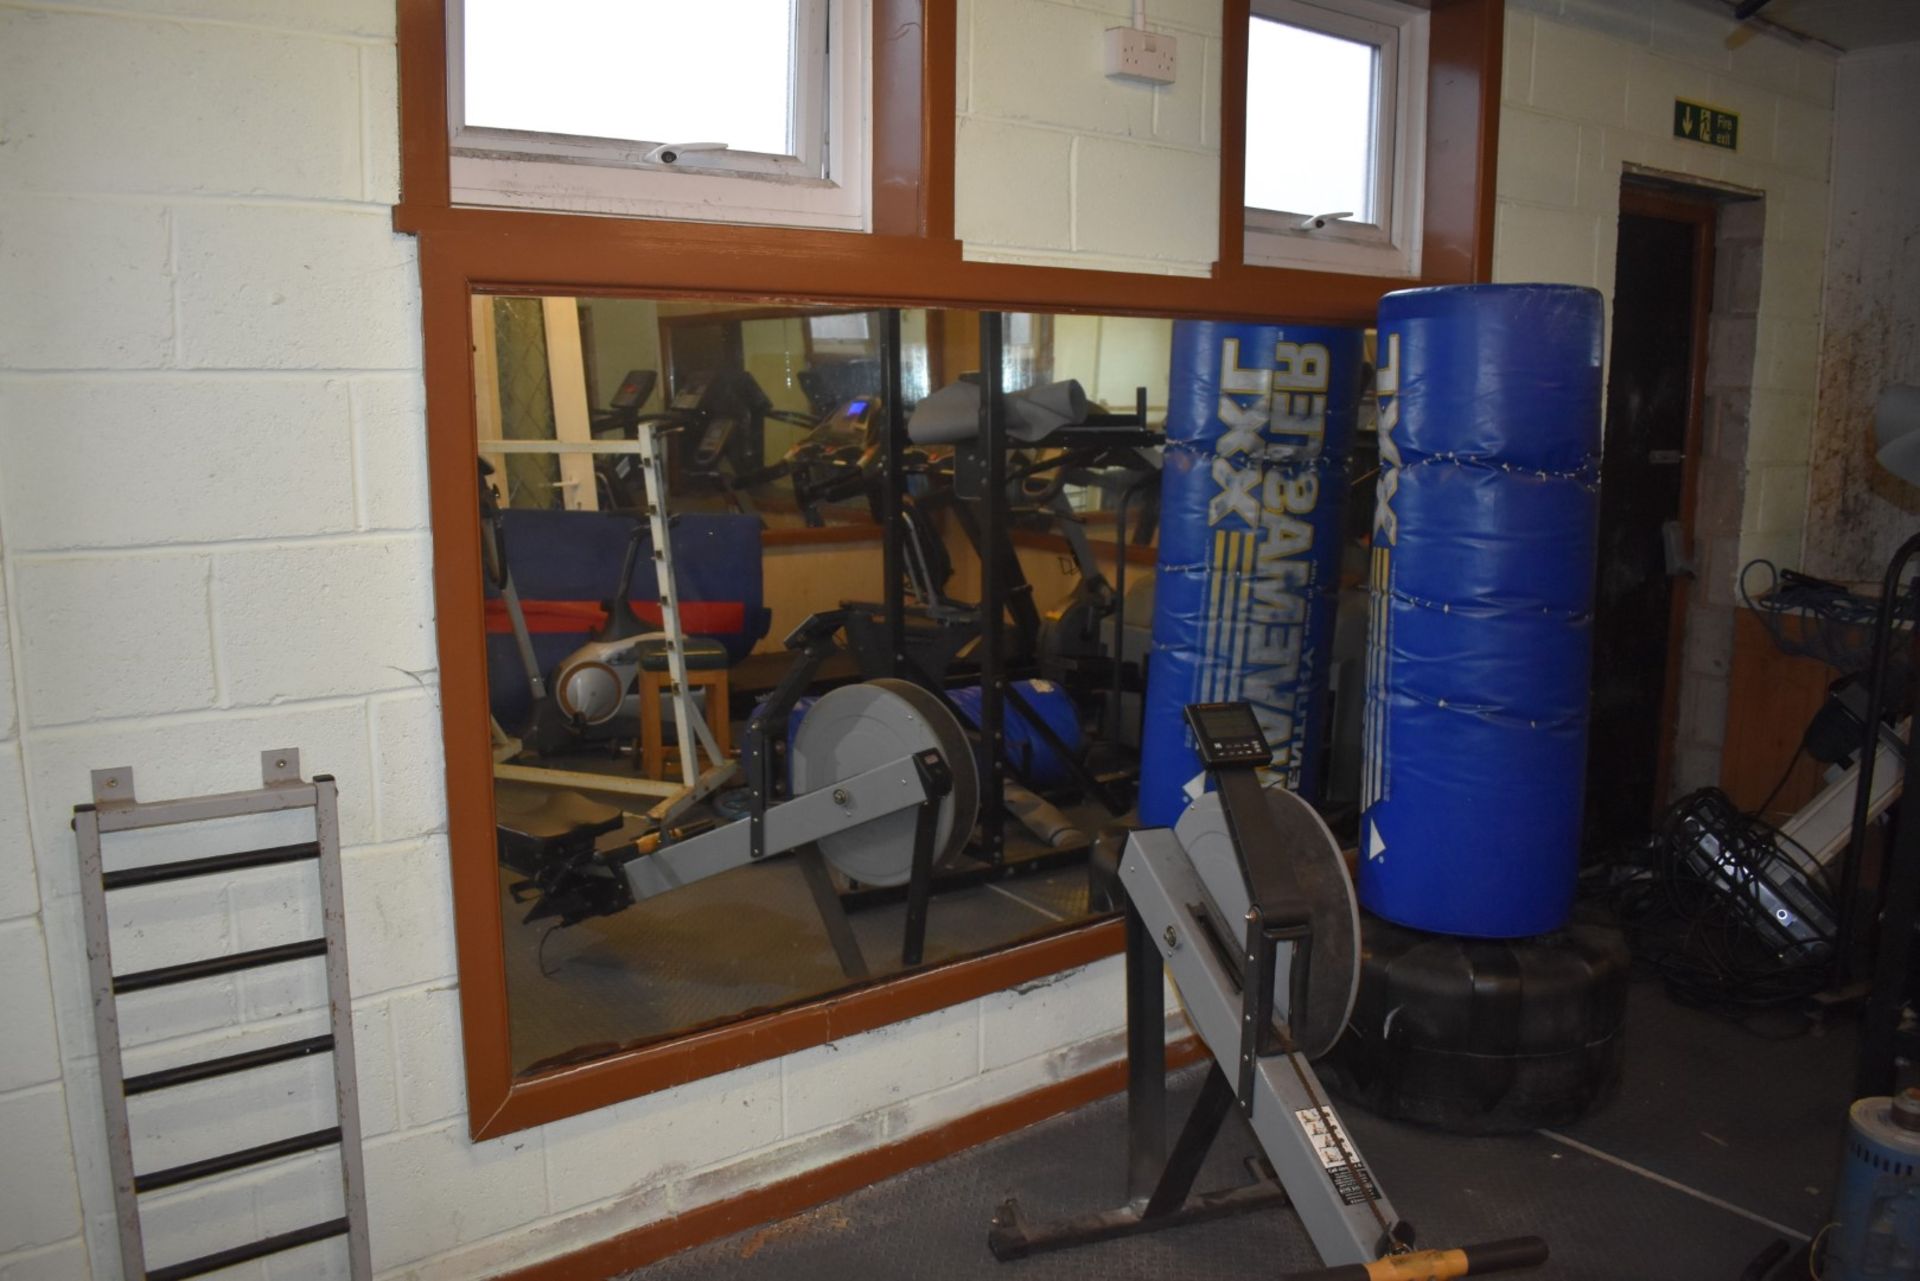 Contents of Bodybuilding and Strongman Gym - Includes Approx 30 Pieces of Gym Equipment, Floor Mats, - Image 26 of 31